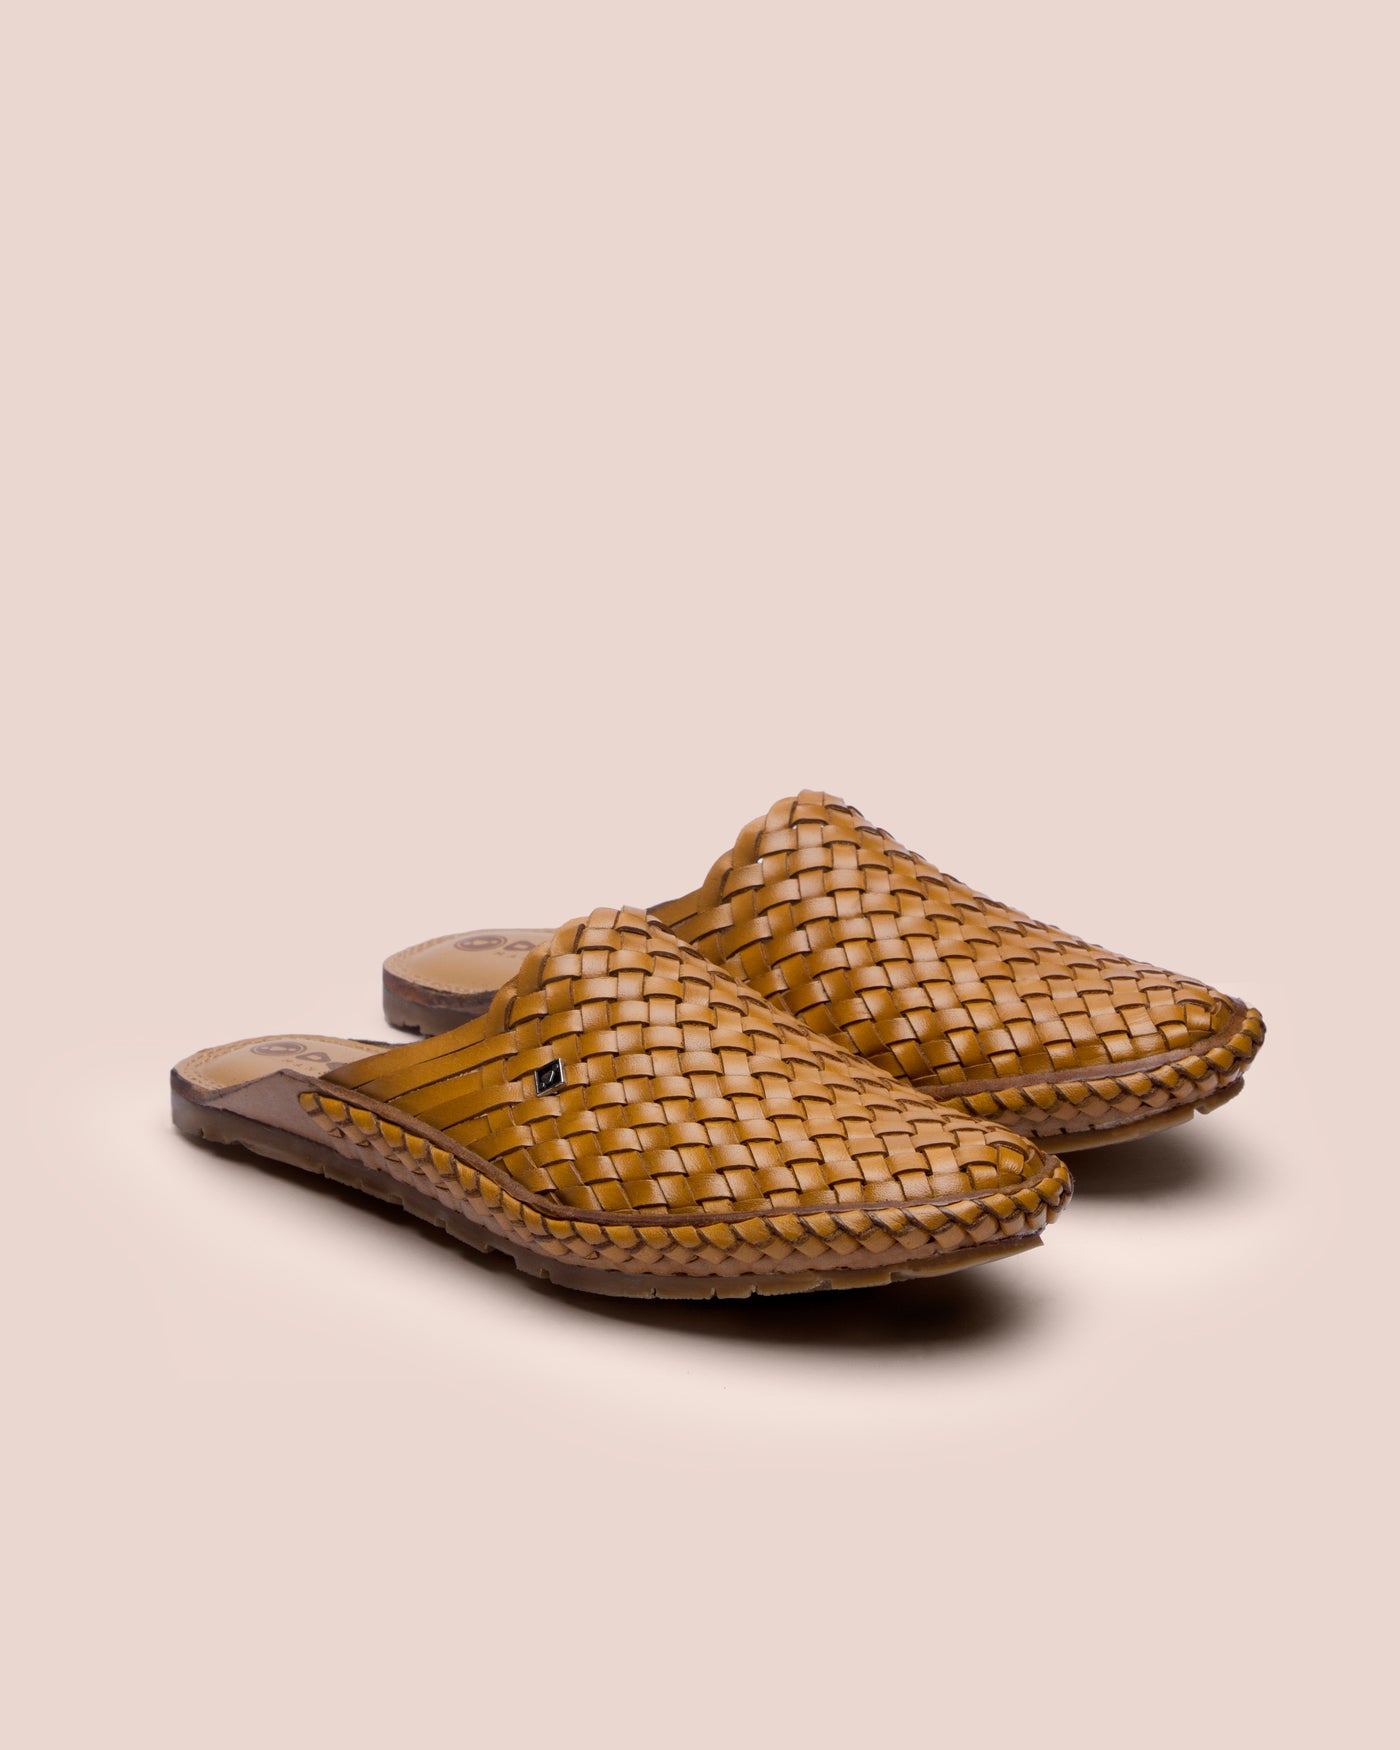 Fireworkshouse-handmade-leather-shoes-DAILY NATURAL